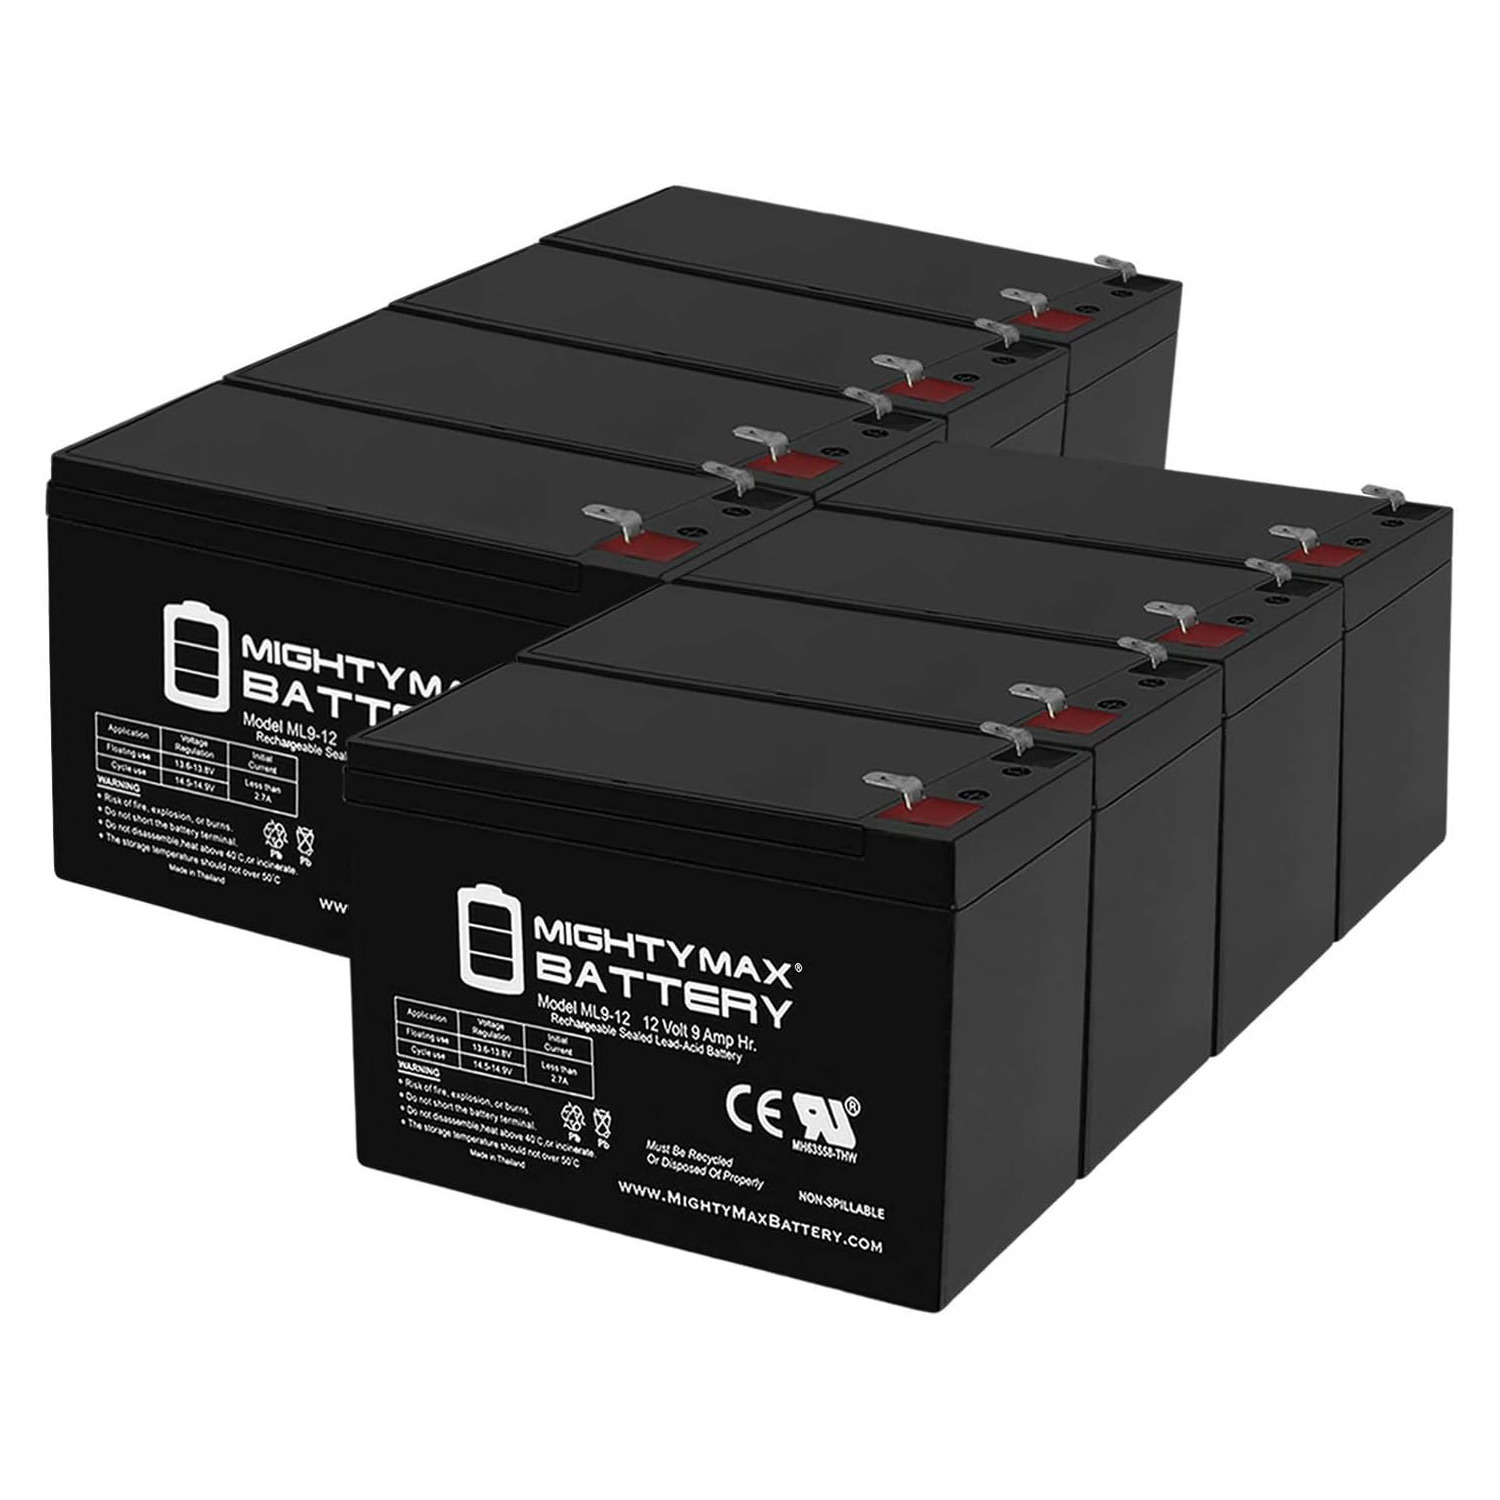 Altronix SMP3PMCTX 12V, 9Ah Lead Acid Battery - 8 Pack